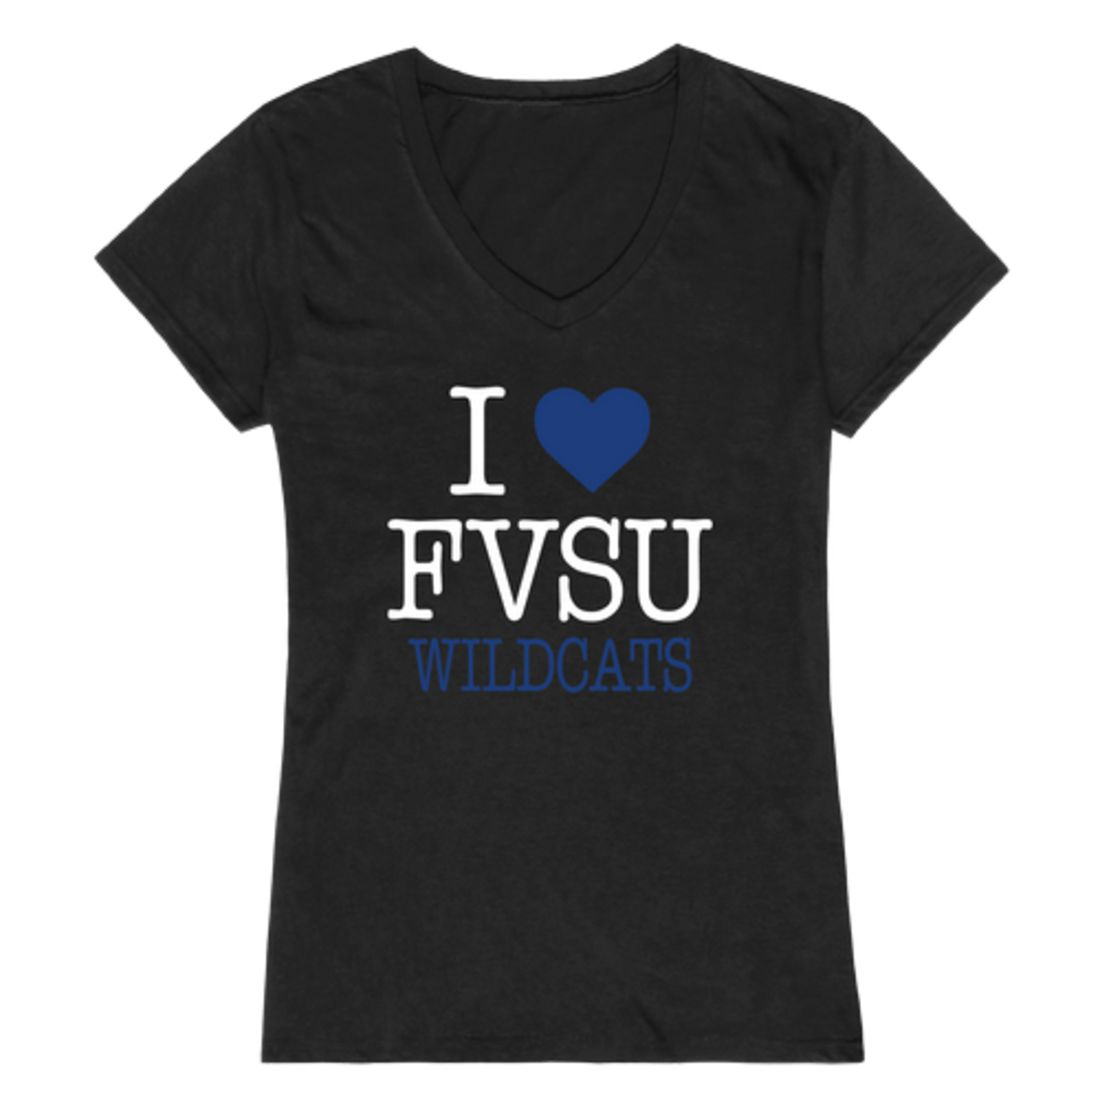 I Love Fort Valley State University Wildcats Womens T-Shirt Tee